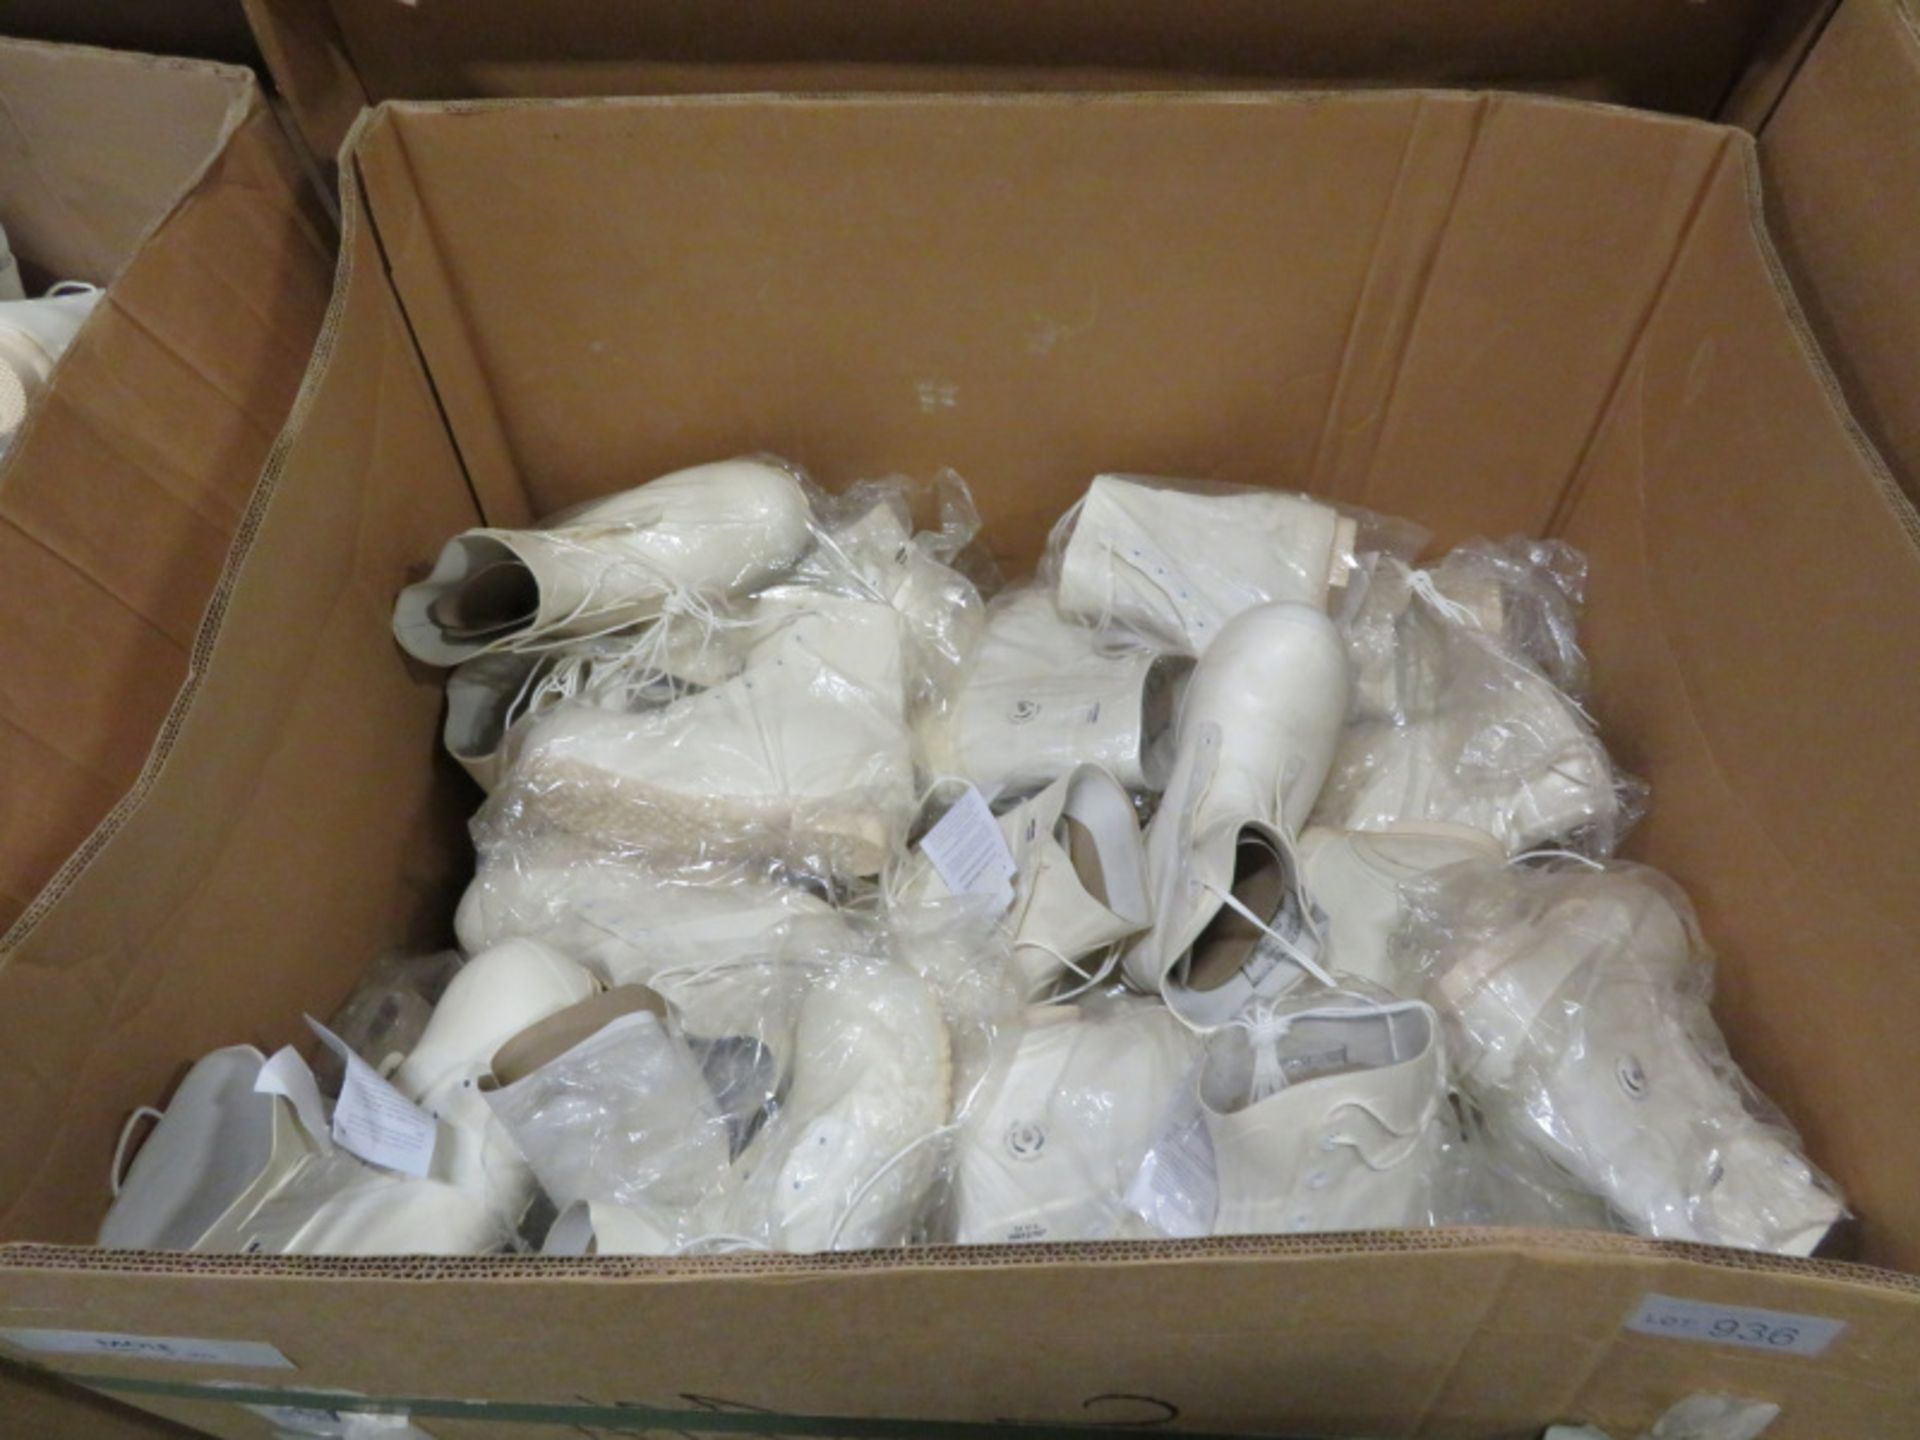 20x Pairs of White Insulated Extreme Cold Boots - Size 14R - Image 2 of 5